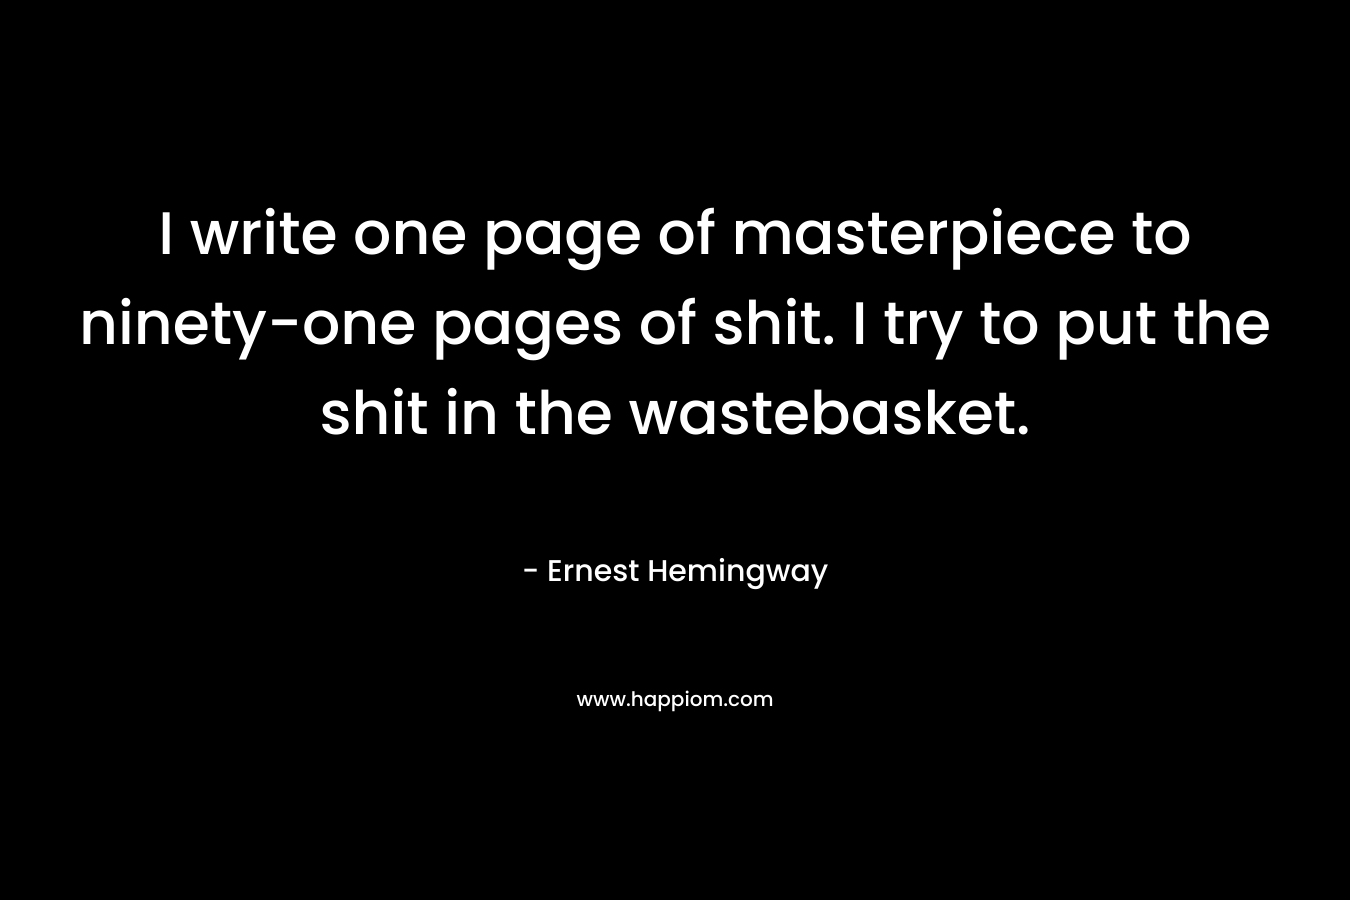 I write one page of masterpiece to ninety-one pages of shit. I try to put the shit in the wastebasket. – Ernest Hemingway